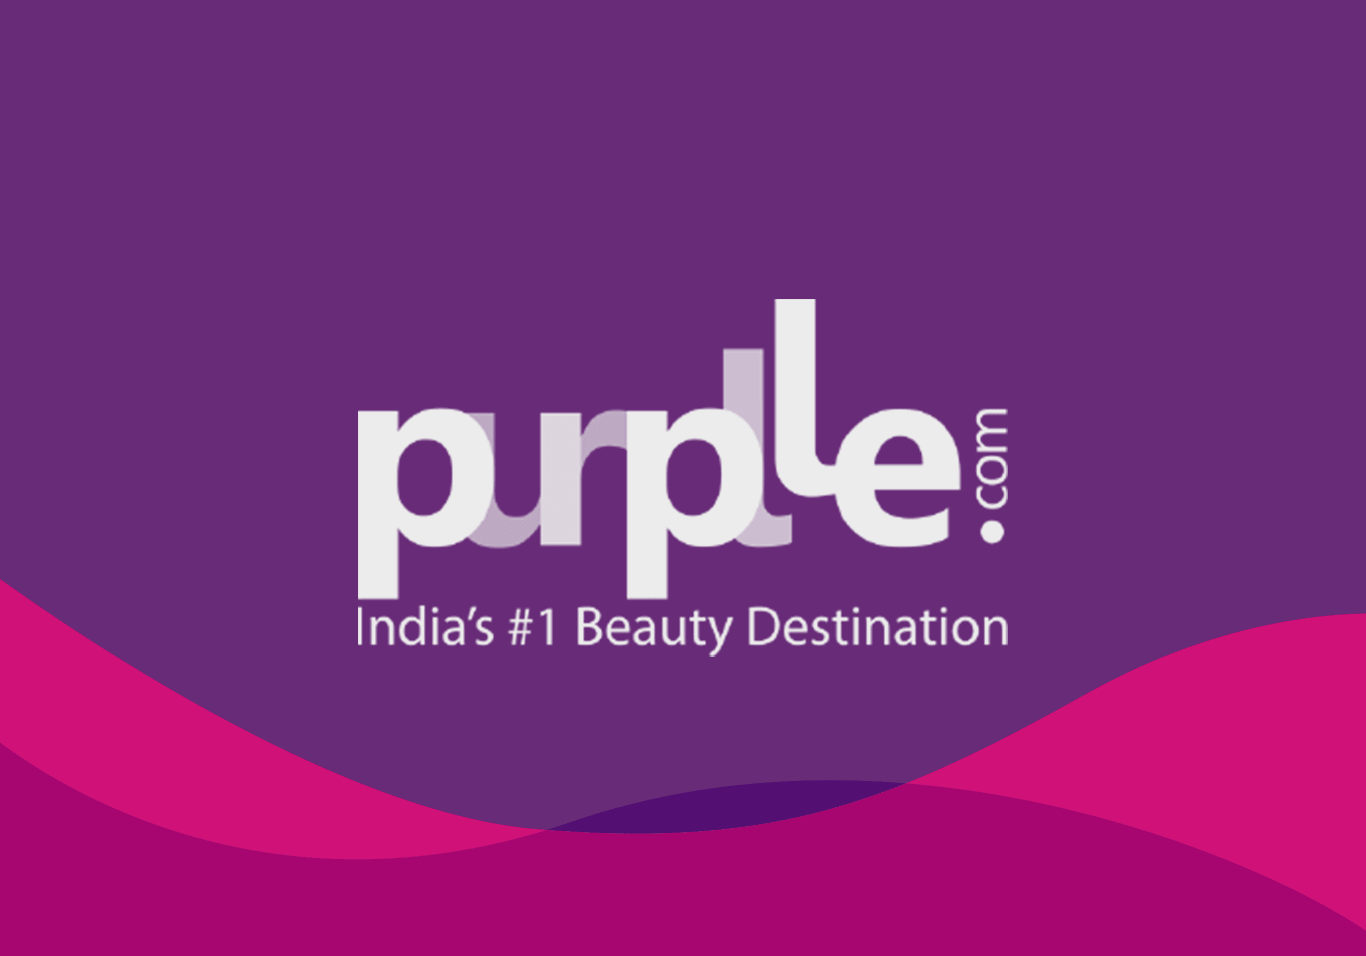 Online beauty products retailer Purplle has become the latest Indian startup to become a "unicorn" after being valued at $1.1 billion, Deal Street Asia said.